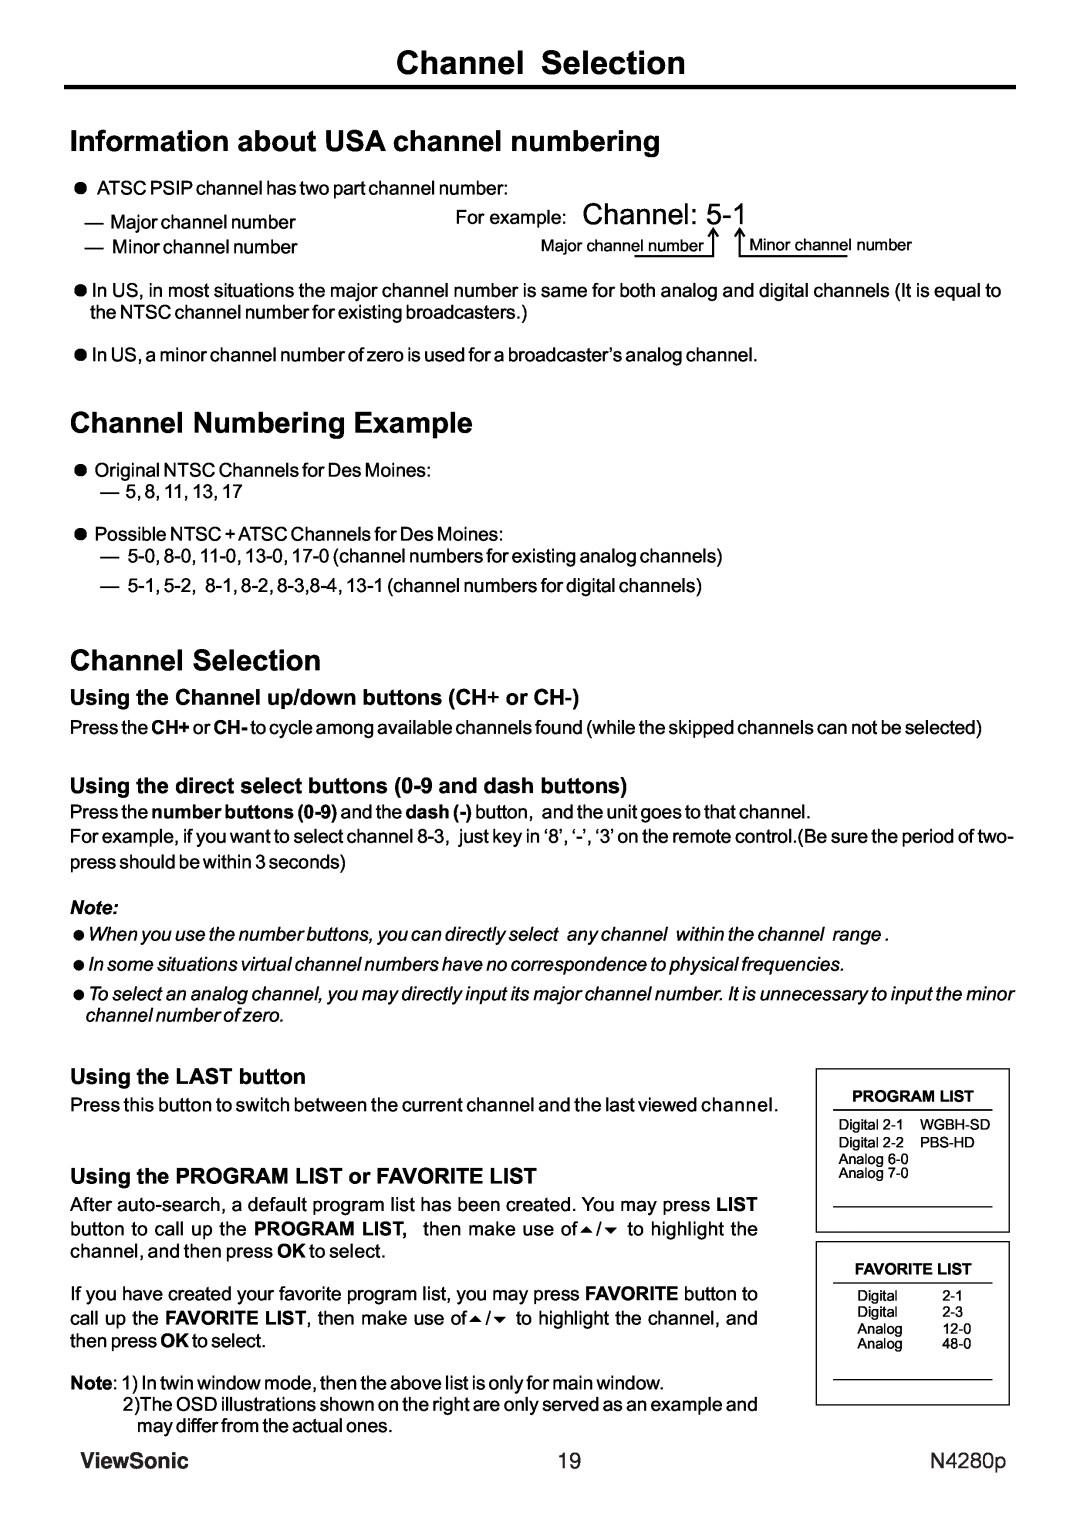 ViewSonic N4280p manual Channel Selection, Information about USA channel numbering, Channel Numbering Example, ViewSonic 